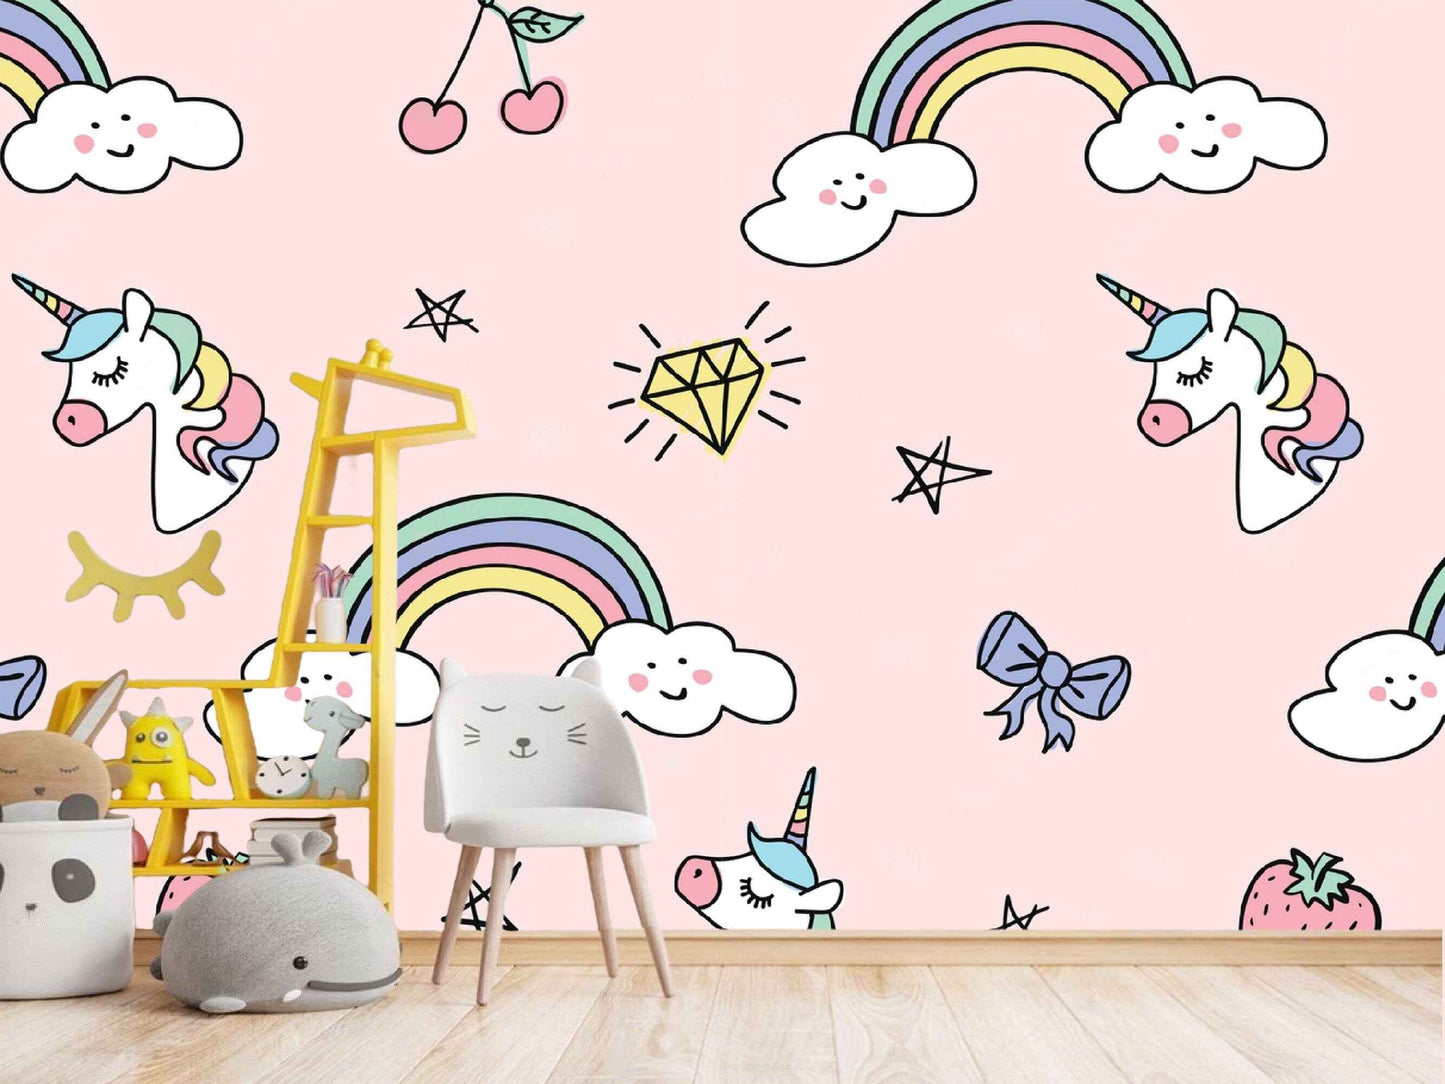 Charming wall decor in a baby girl's room, adding a touch of whimsy and joy to the space.